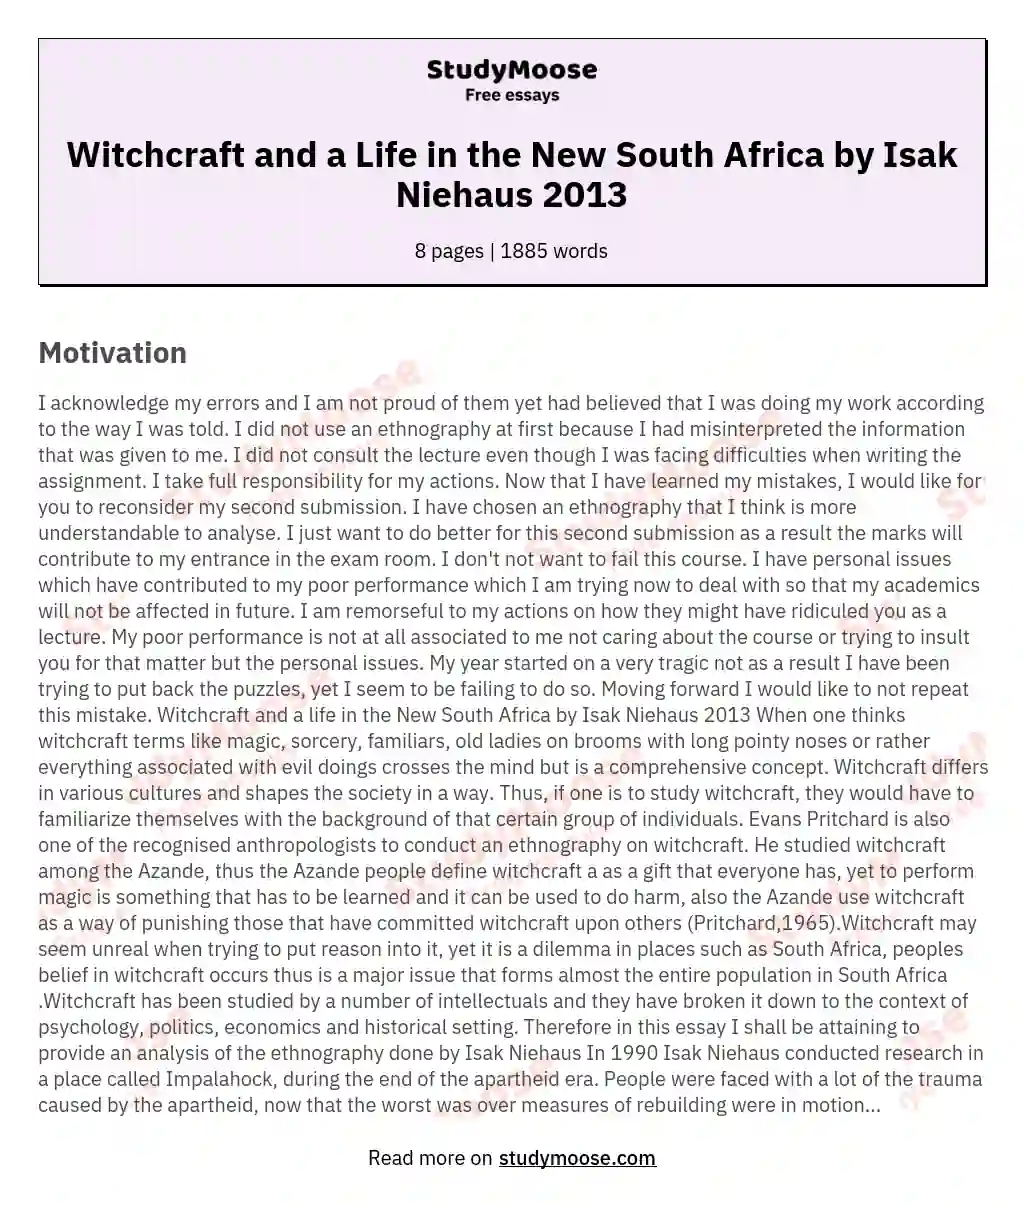 Witchcraft and a Life in the New South Africa by Isak Niehaus 2013 essay